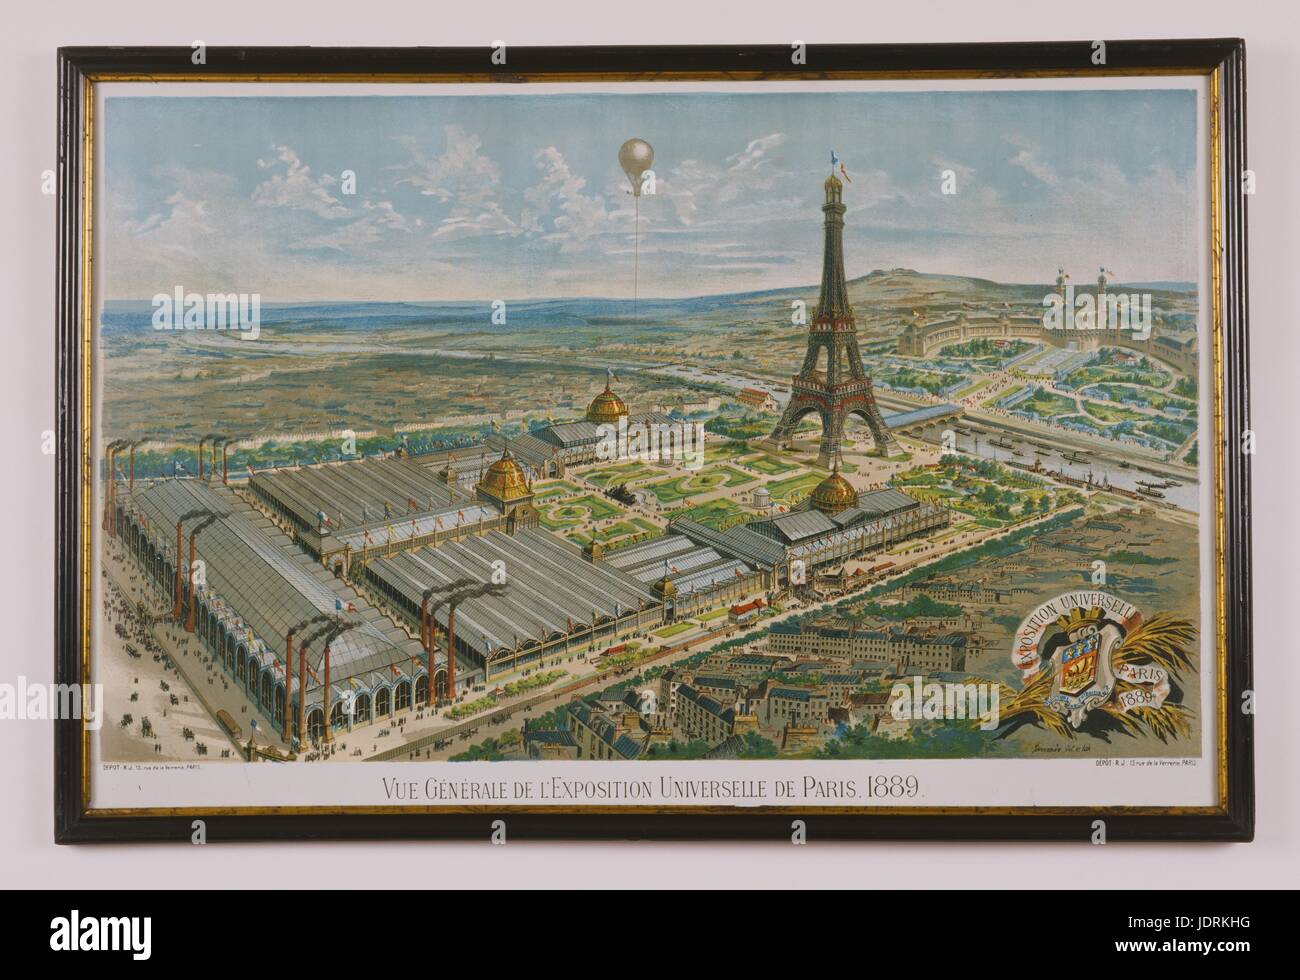 Sewande del. et lith.  General view of the 1889 World Fair in Paris   Framed lithograph (48.5 x 715 cm)  Muller-Quênot Collection Stock Photo